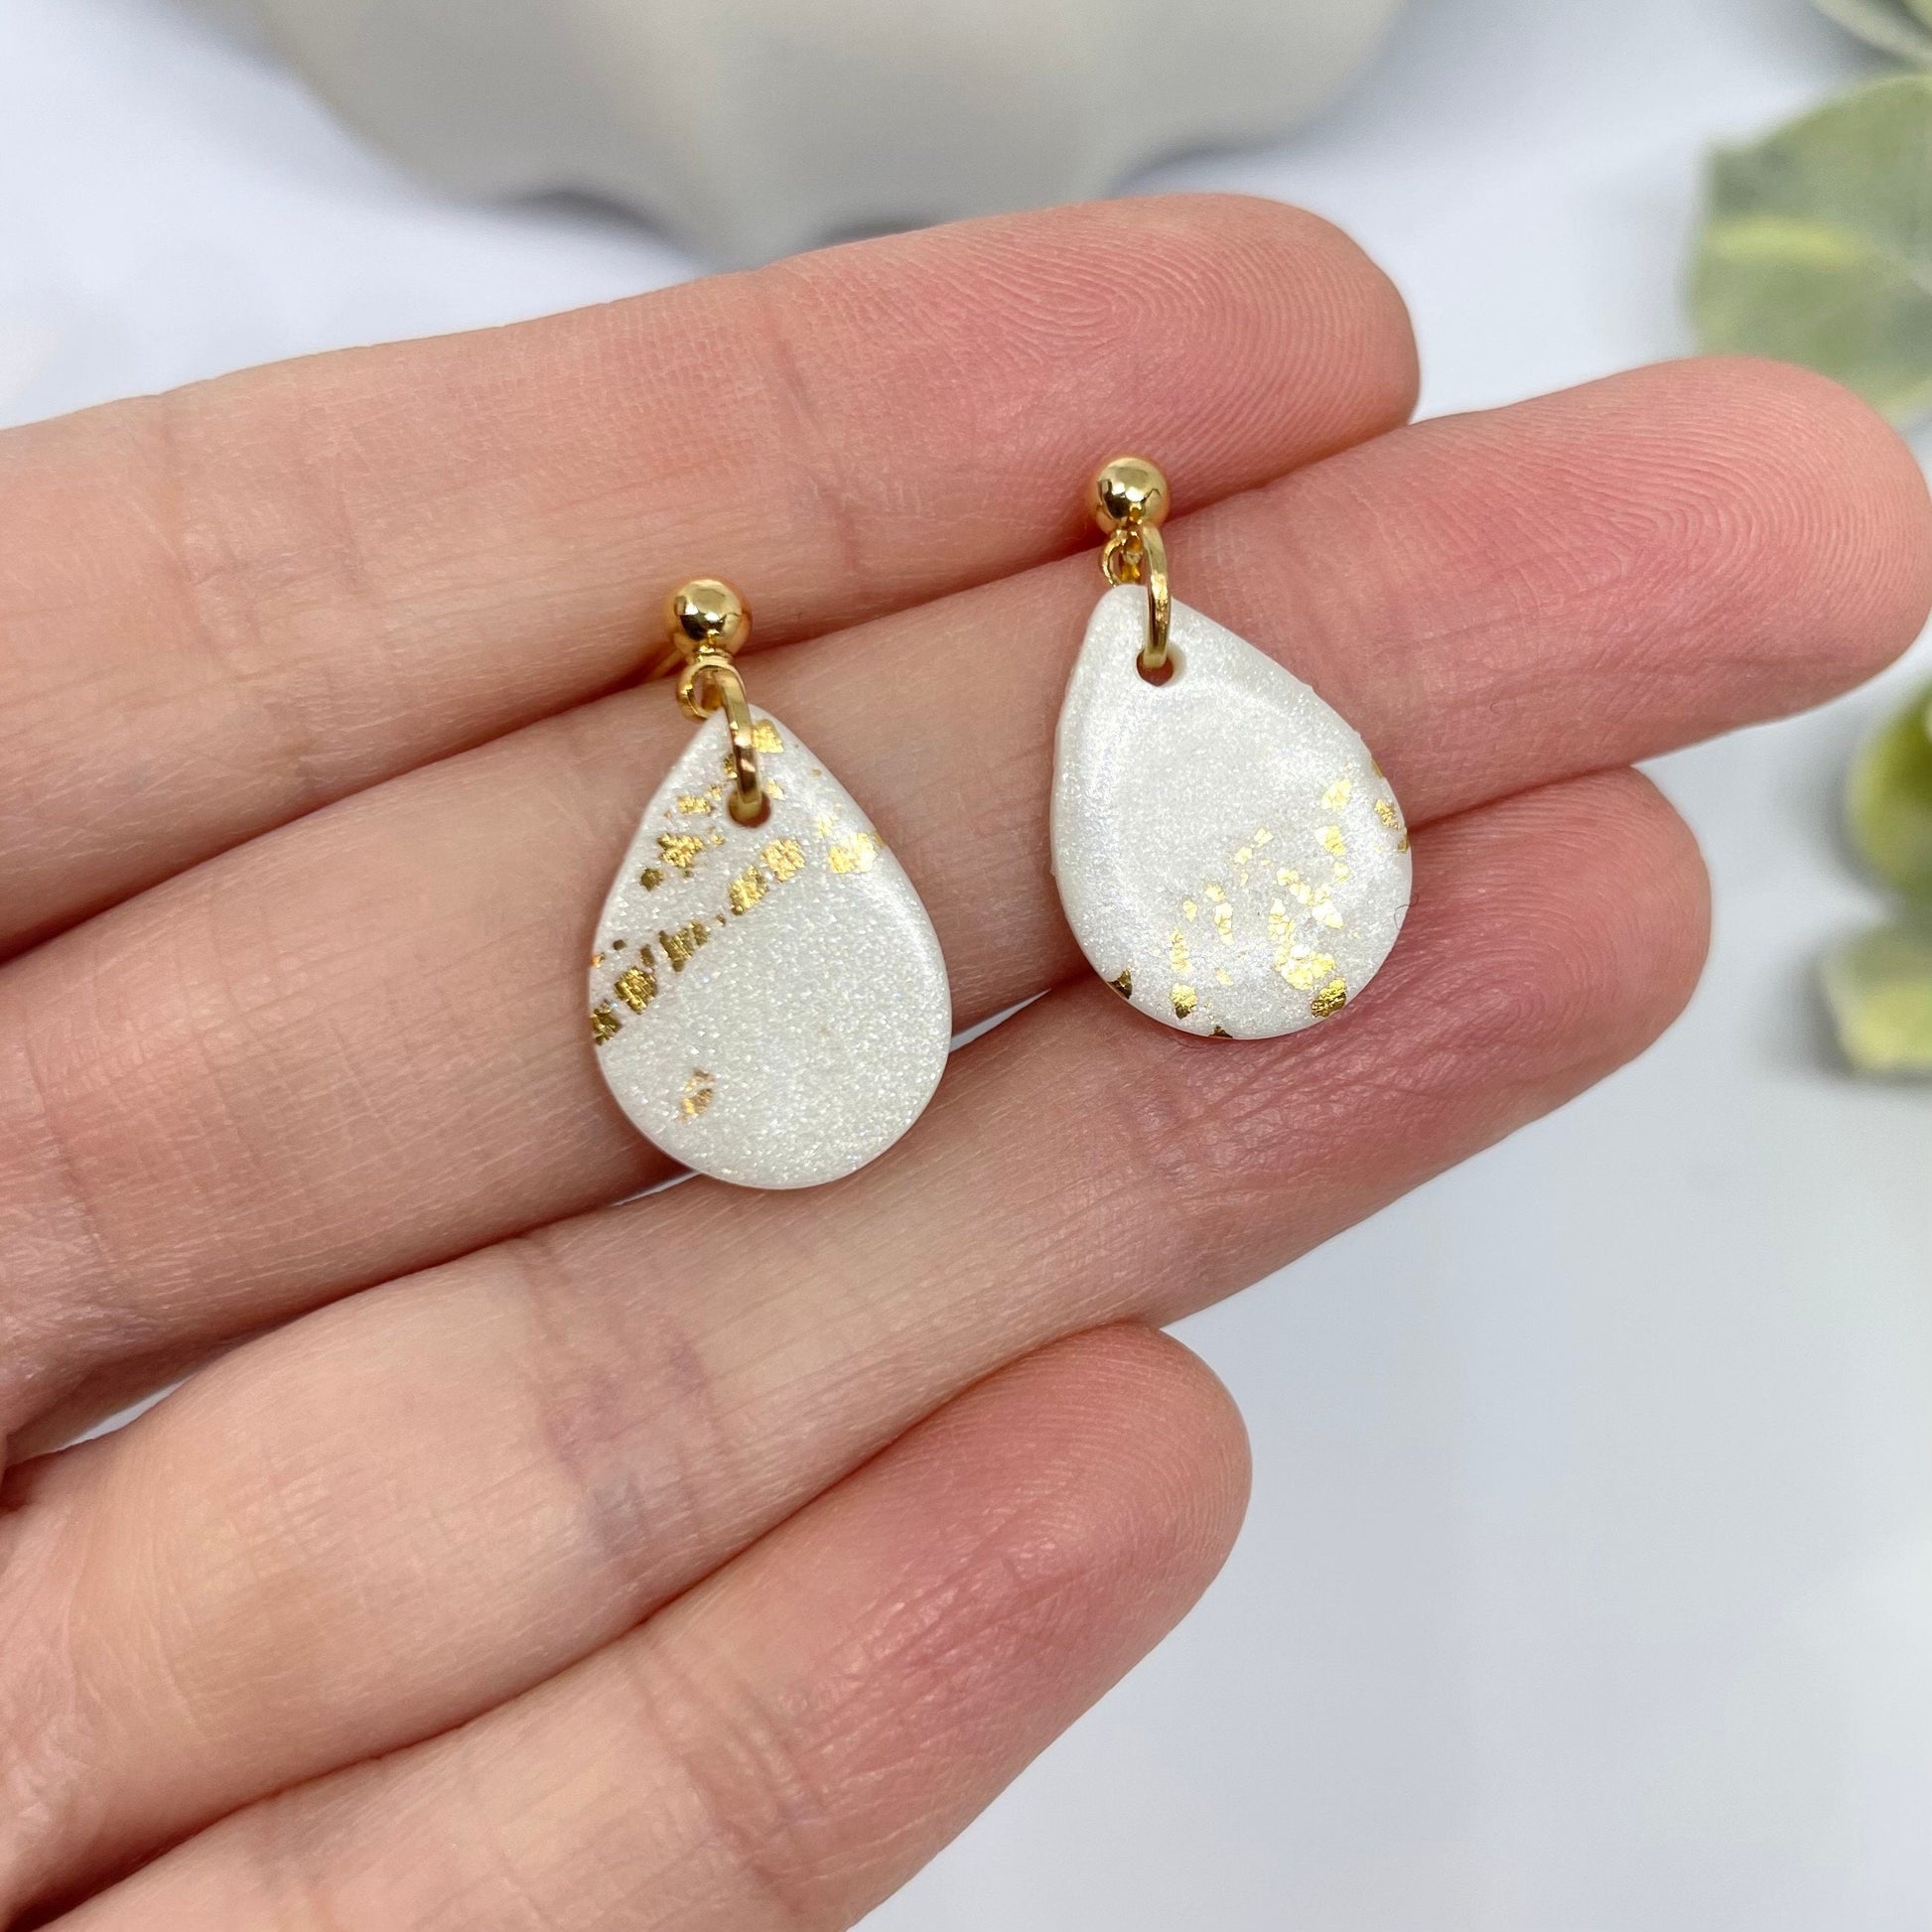 Beautiful Birthday gift earrings for her, gold leaf polymer clay dangle earrings, post box gift, best friend birthday gift, girlfriend gift,